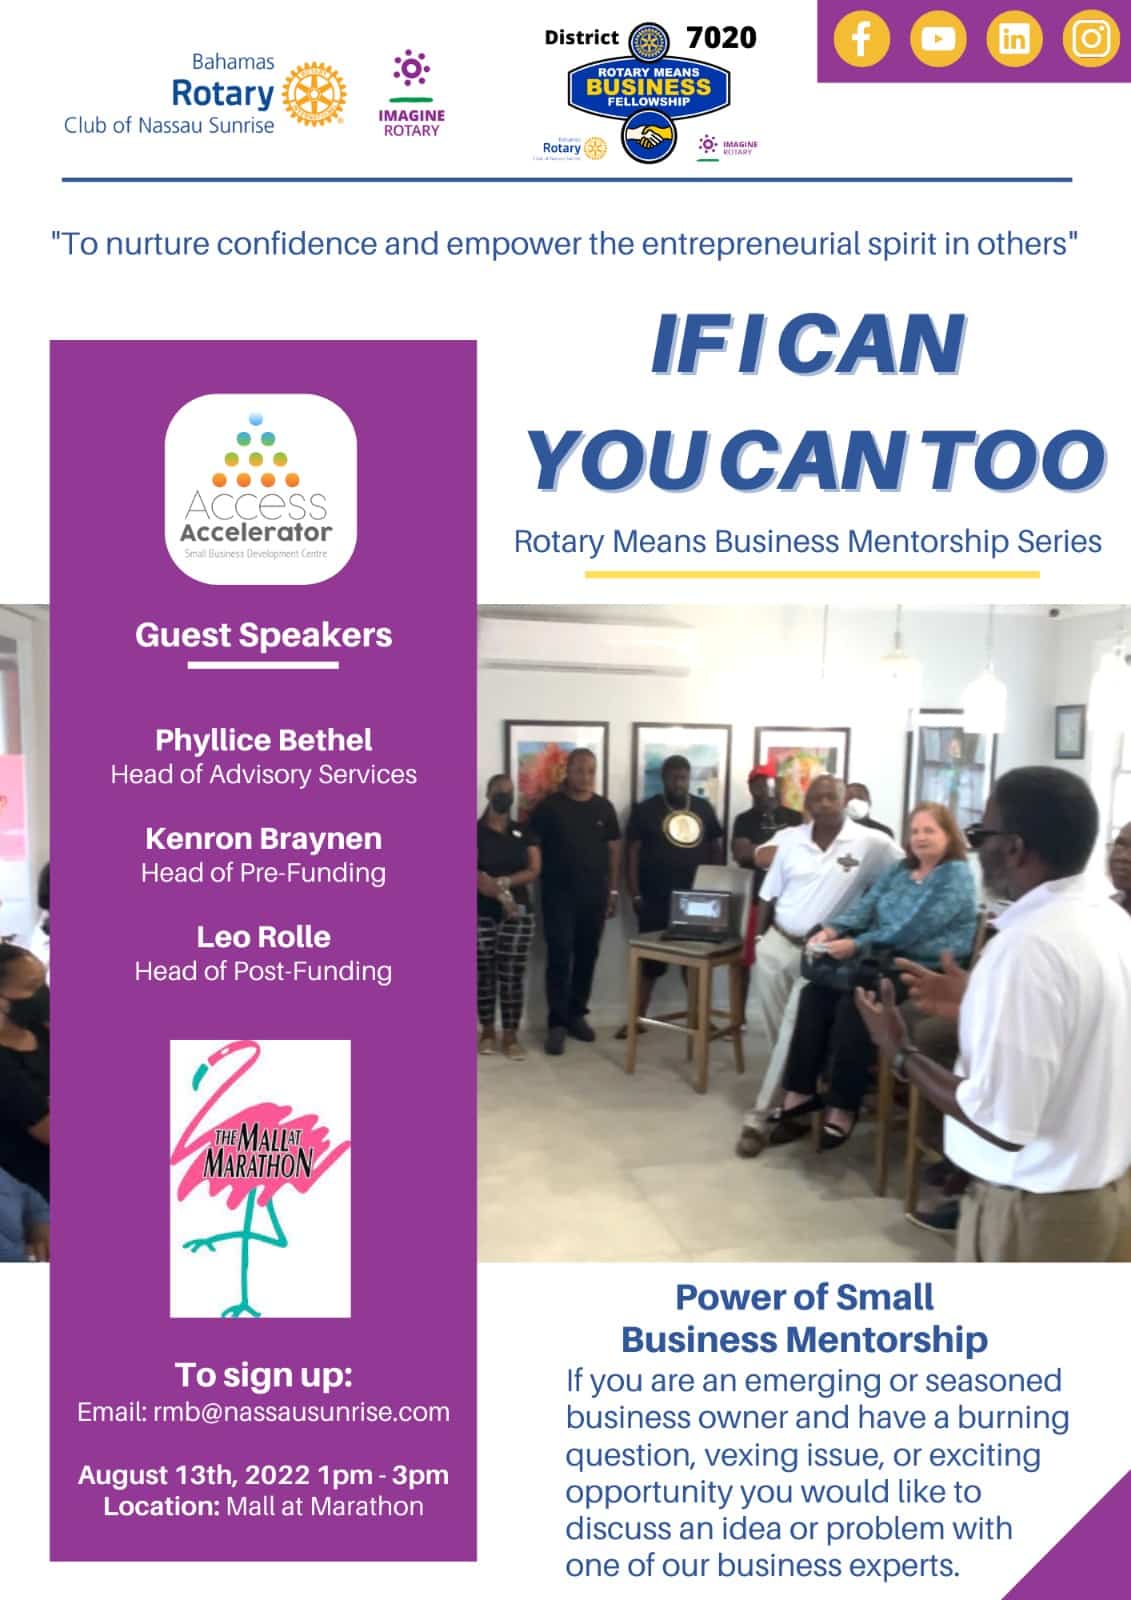 Rotary Means Business Nassau Sunrise - Power of Small Business Mentorship graphic flier